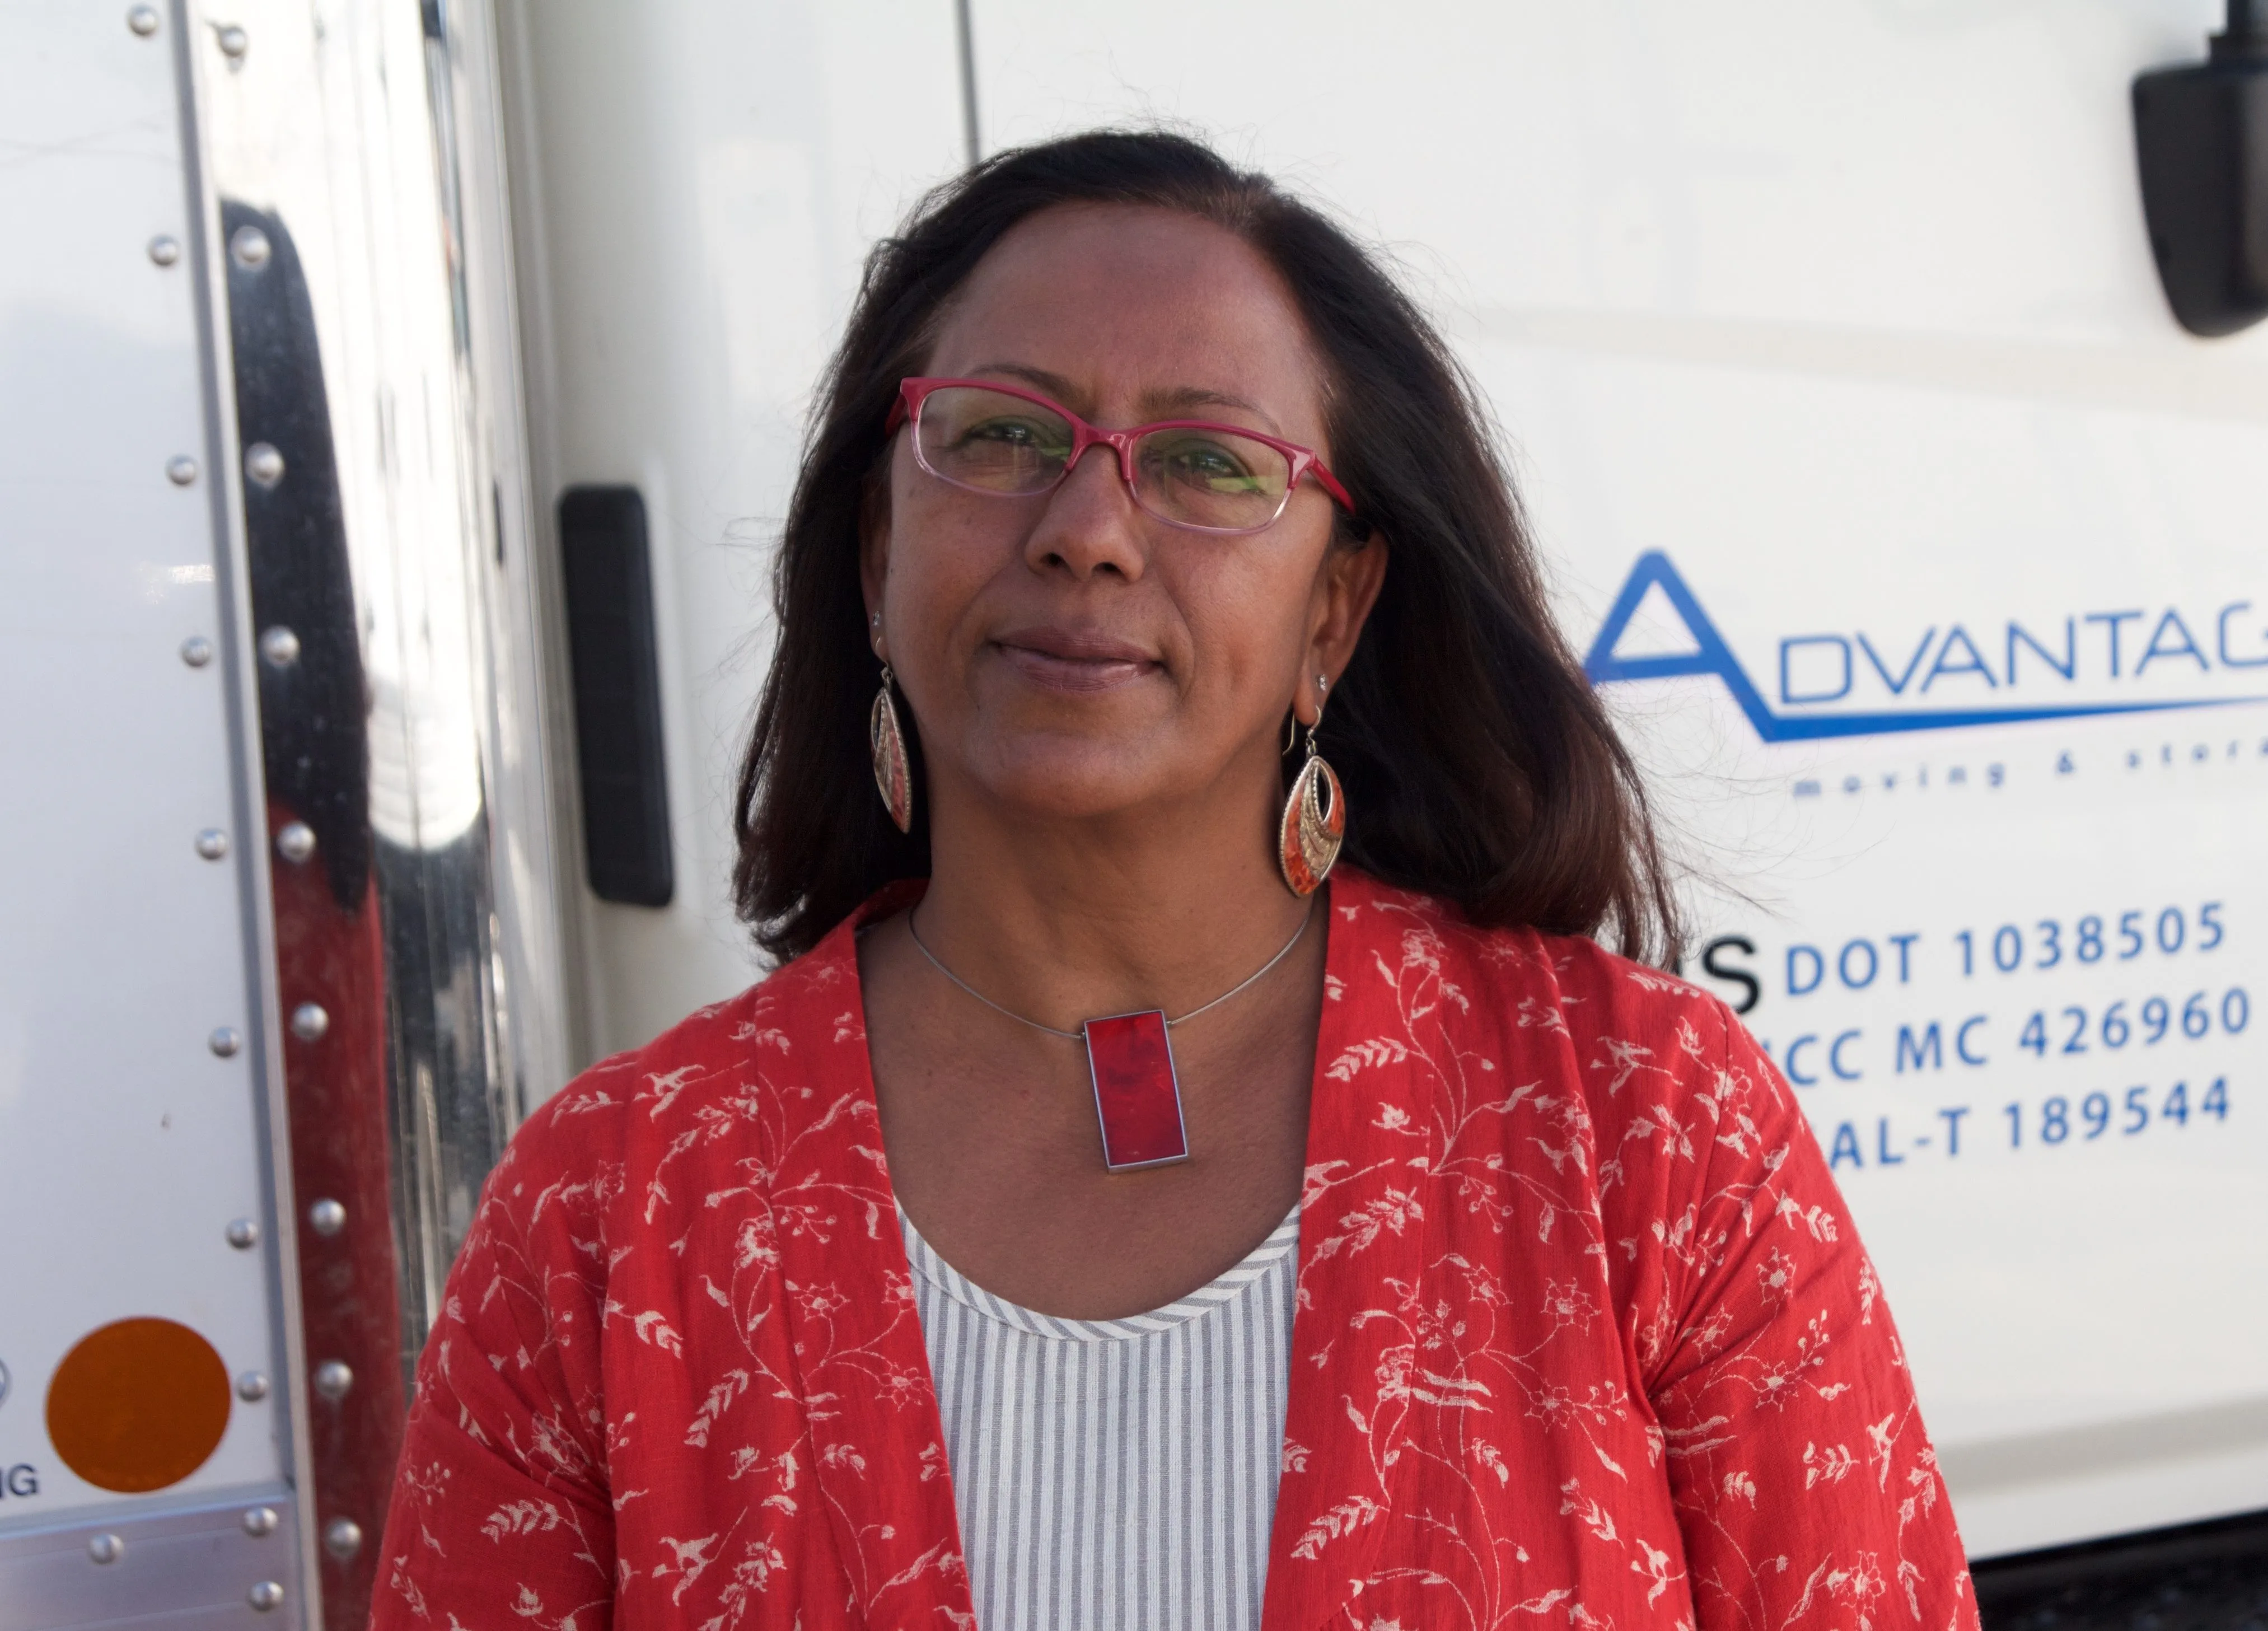 Chitra Bheeman is vice president of Advantage Moving &amp; Storage, a Diamond Certified company. She can be reached at (408) 840-3997 or by email.